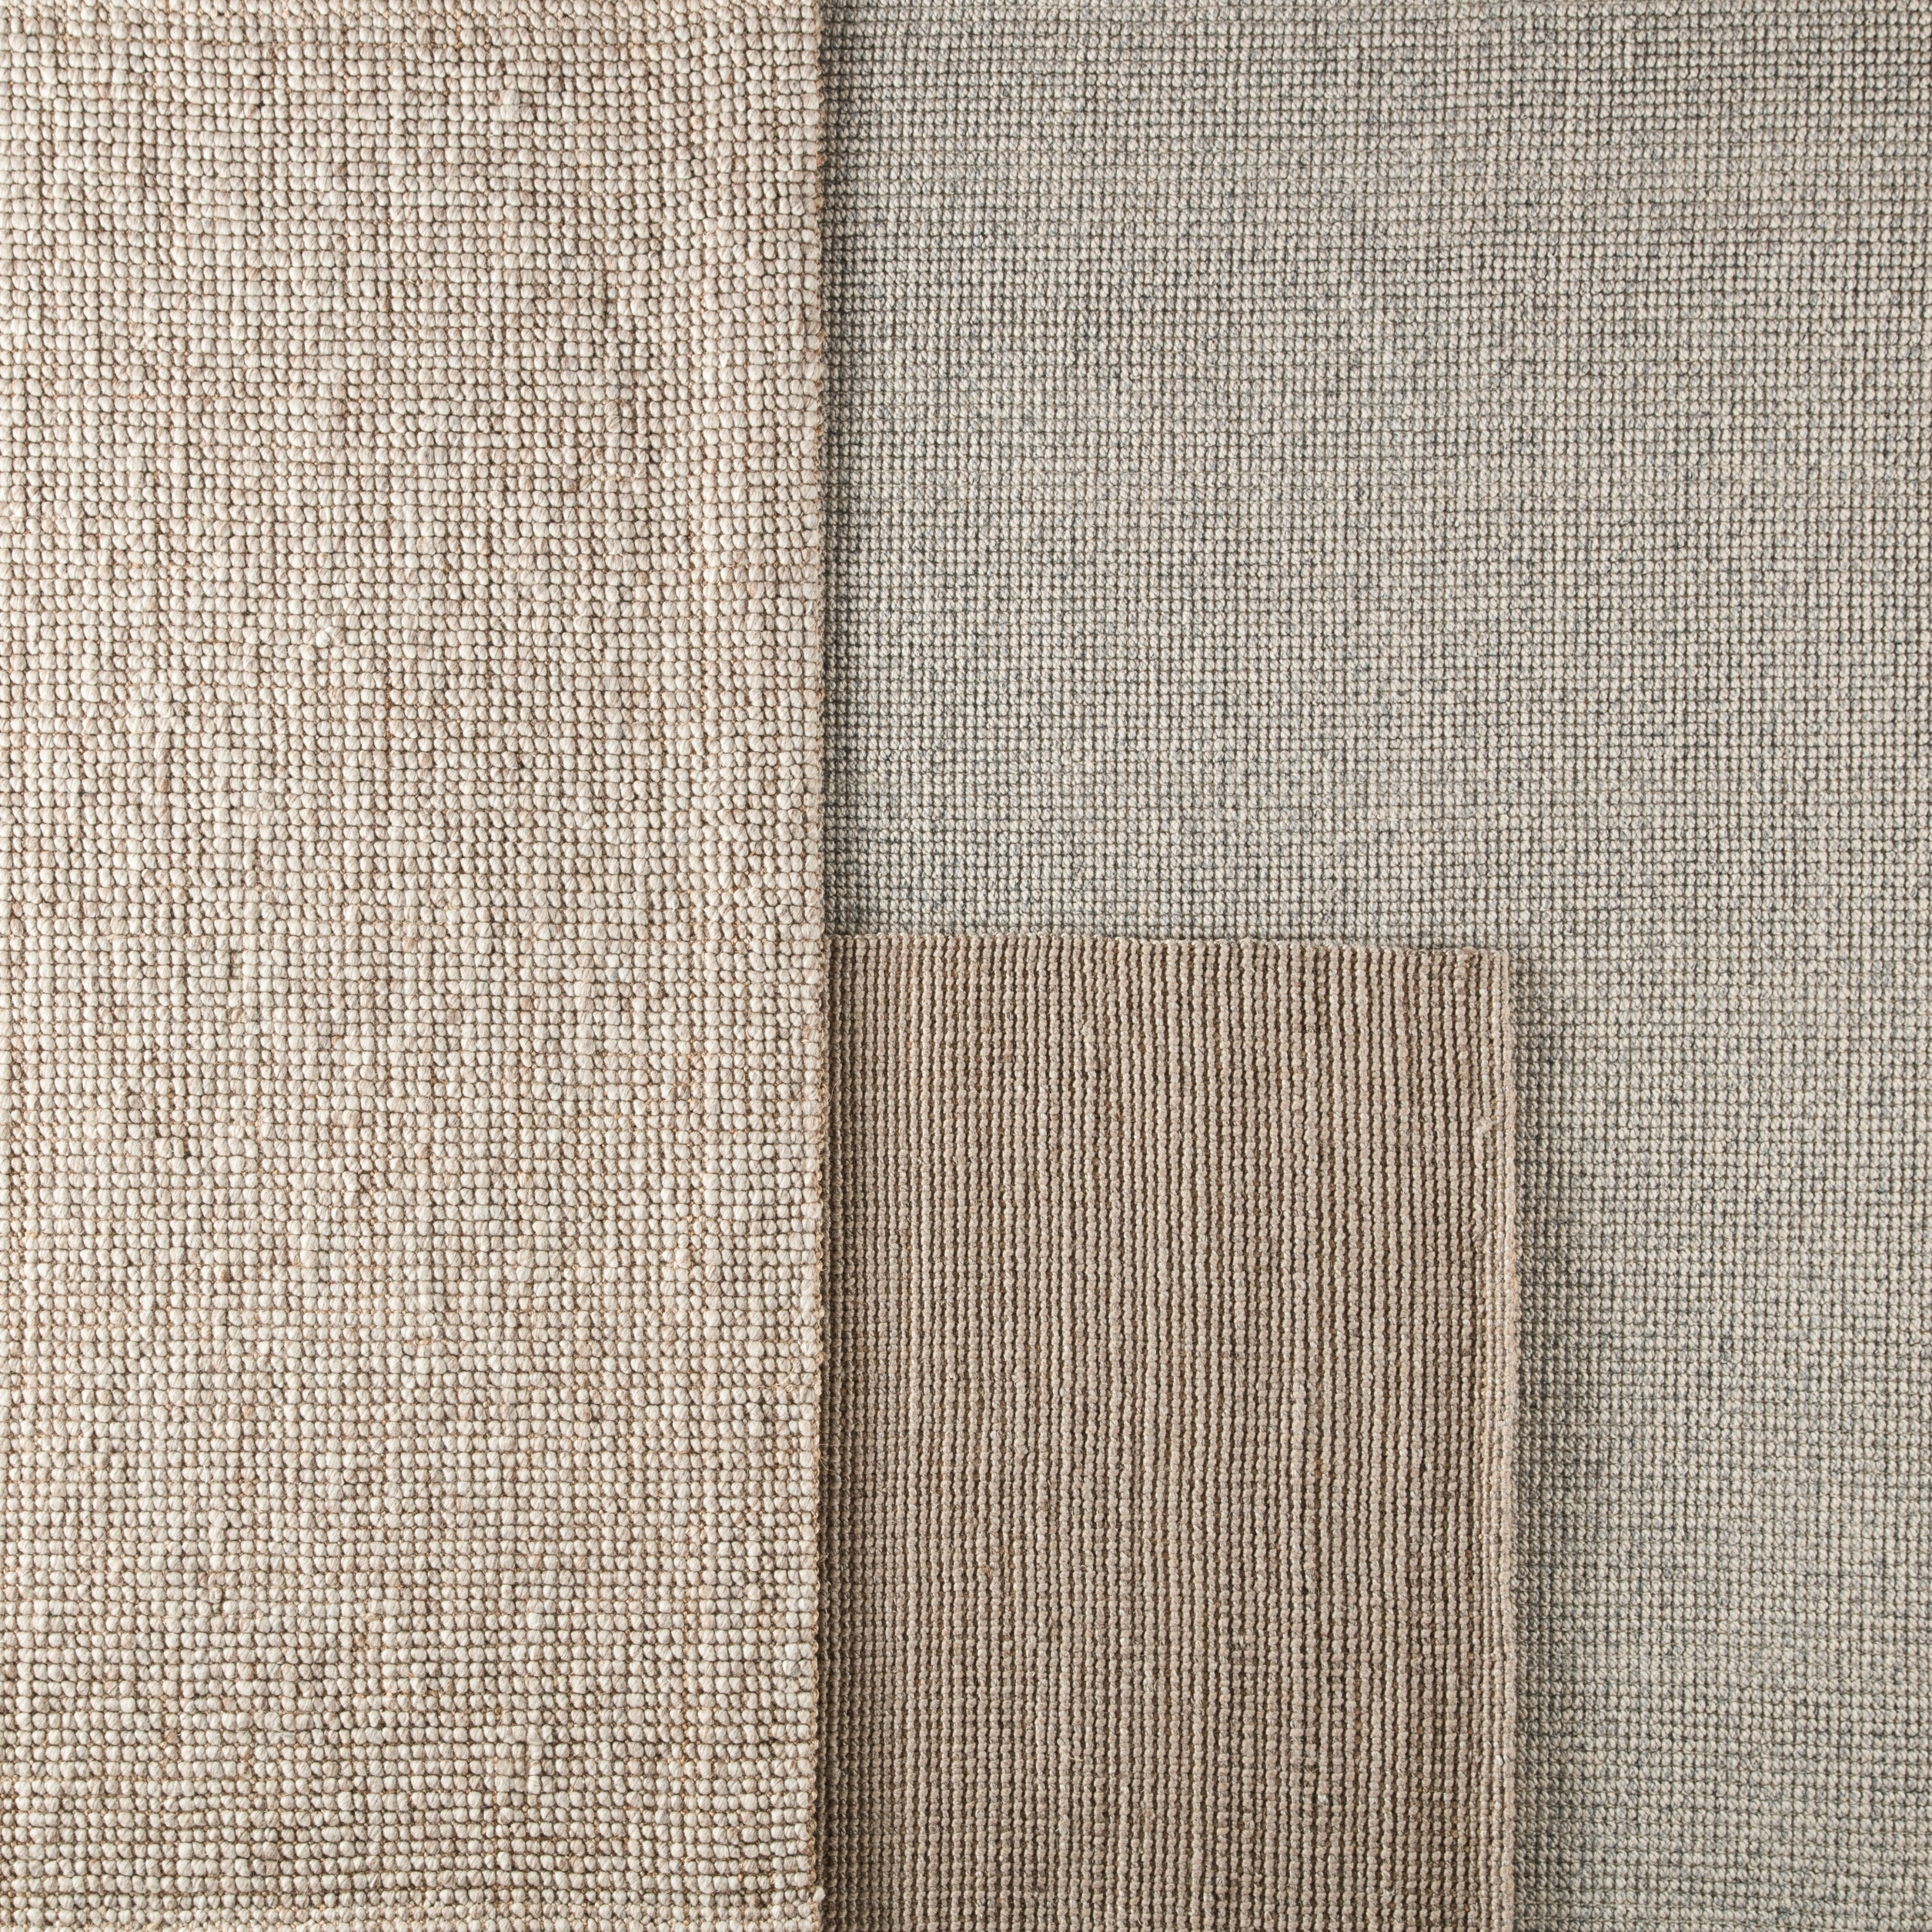 Beech Natural Solid Tan/ Taupe Area Rug (10'X14') - Image 5